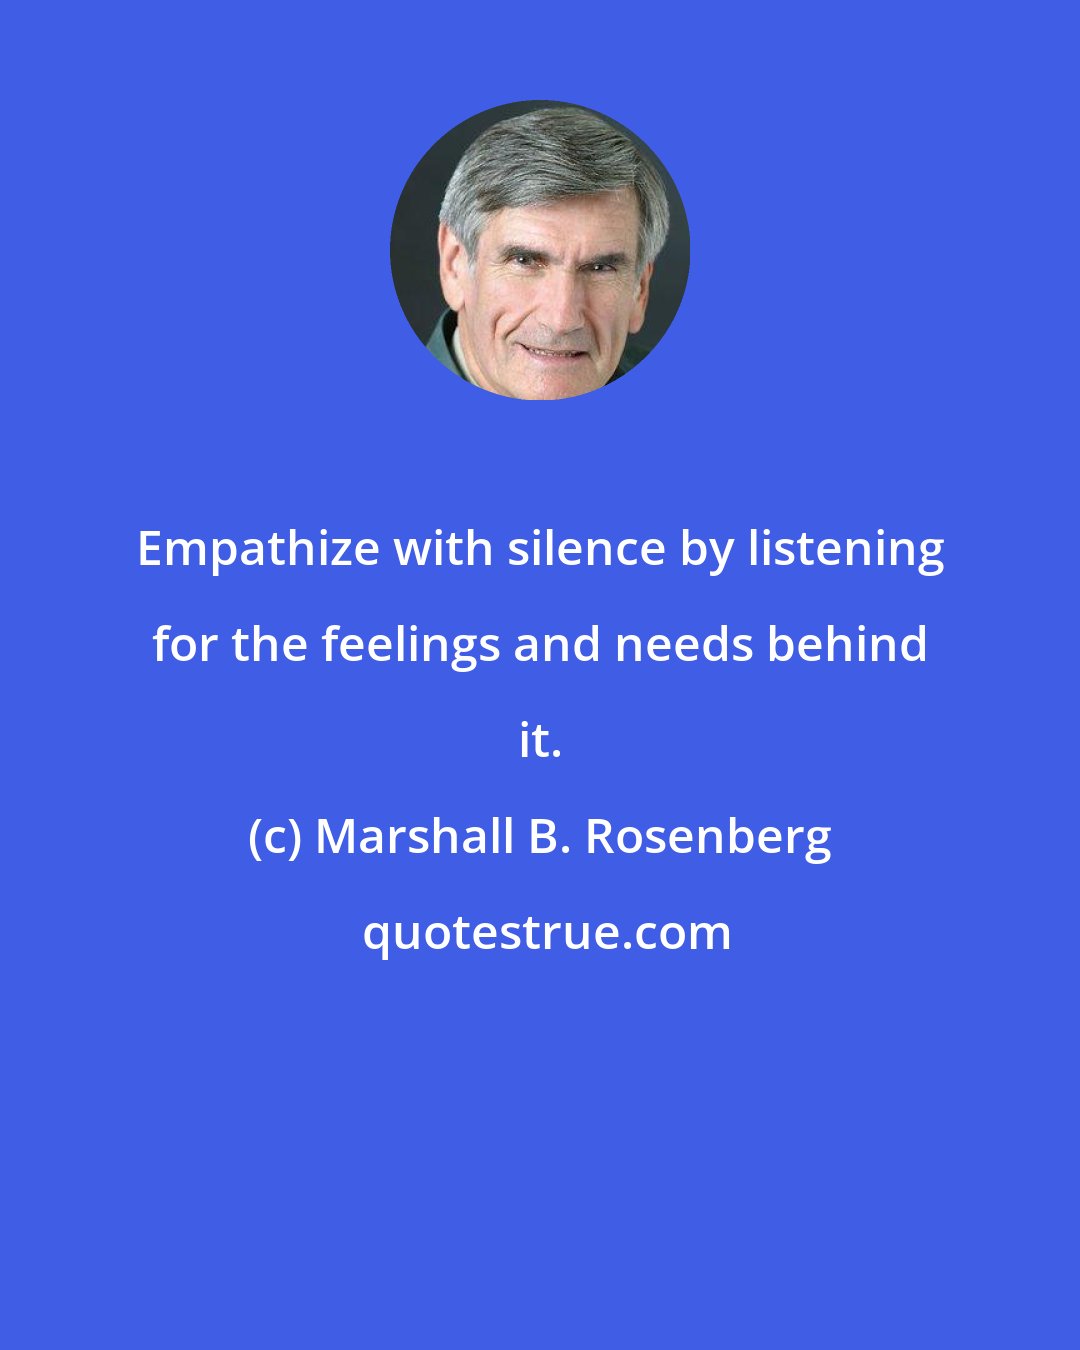 Marshall B. Rosenberg: Empathize with silence by listening for the feelings and needs behind it.